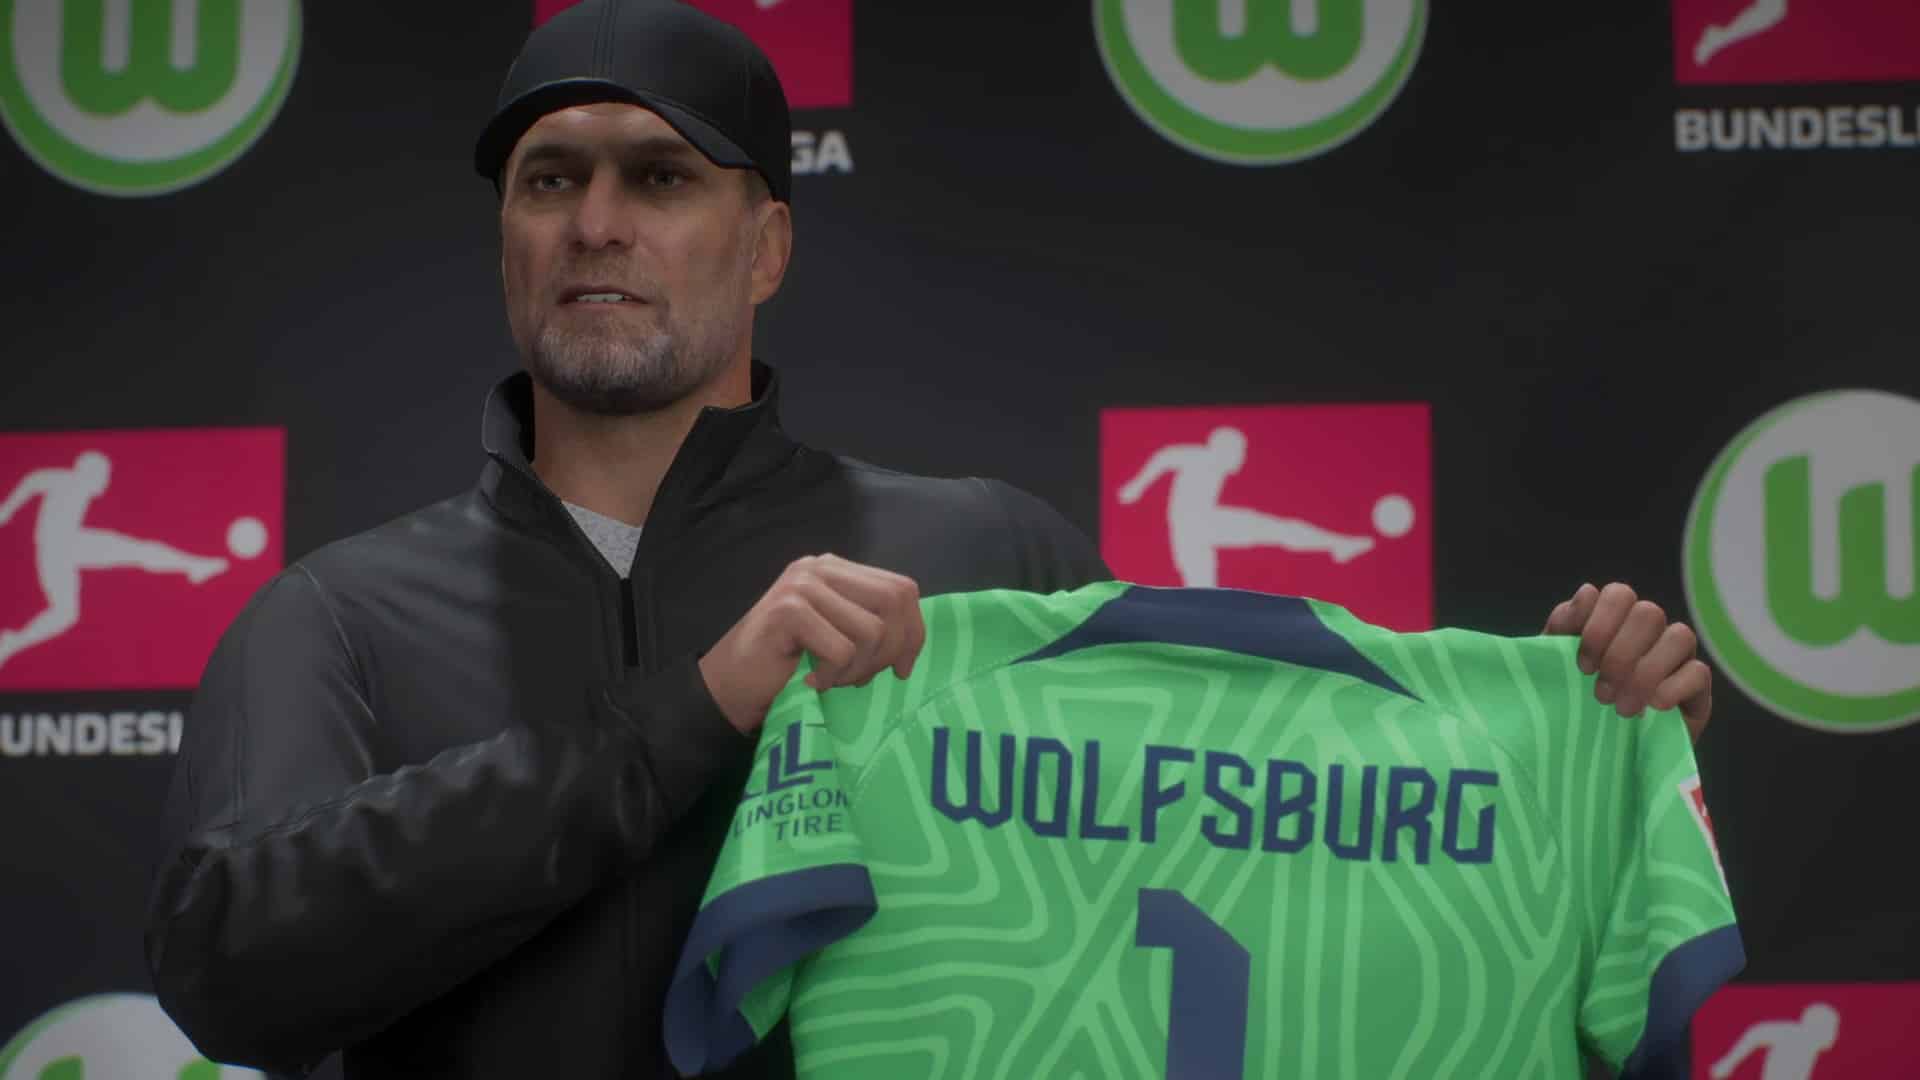 (Kloppo as VFL coach. Wolfsburg fans can only dream of that at the moment.)